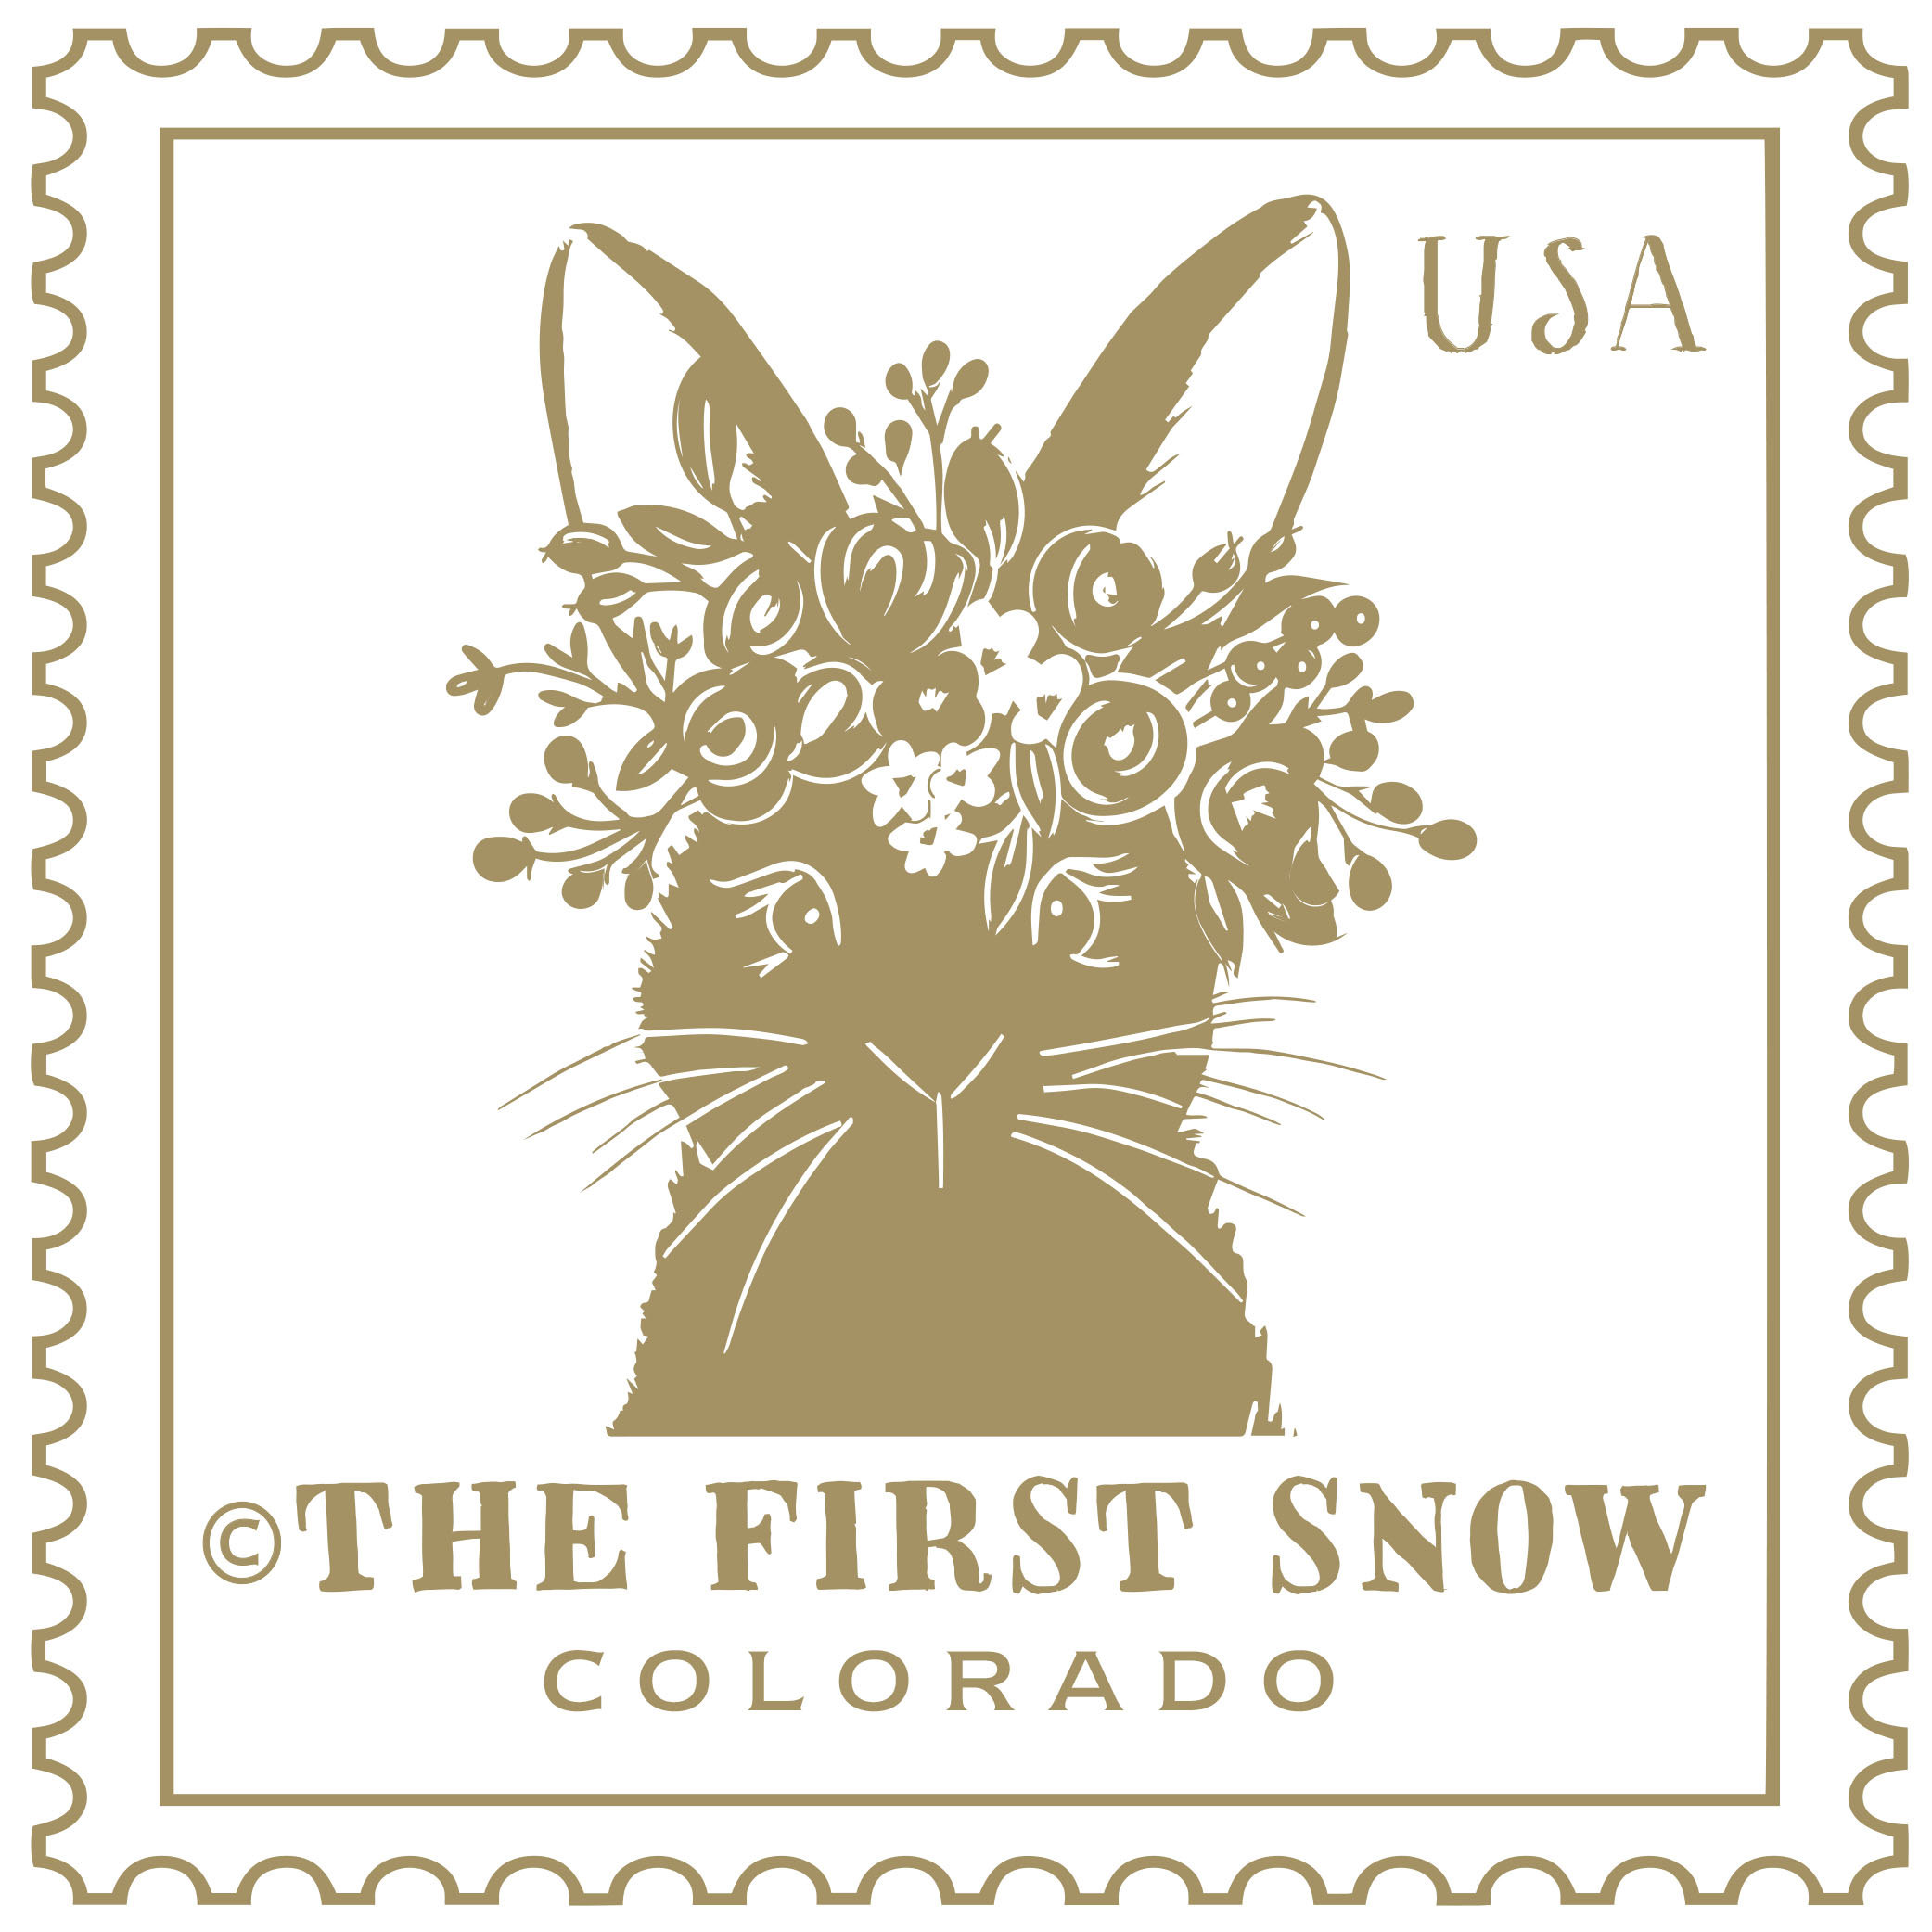 The First Snow by firstsnowfall on Etsy